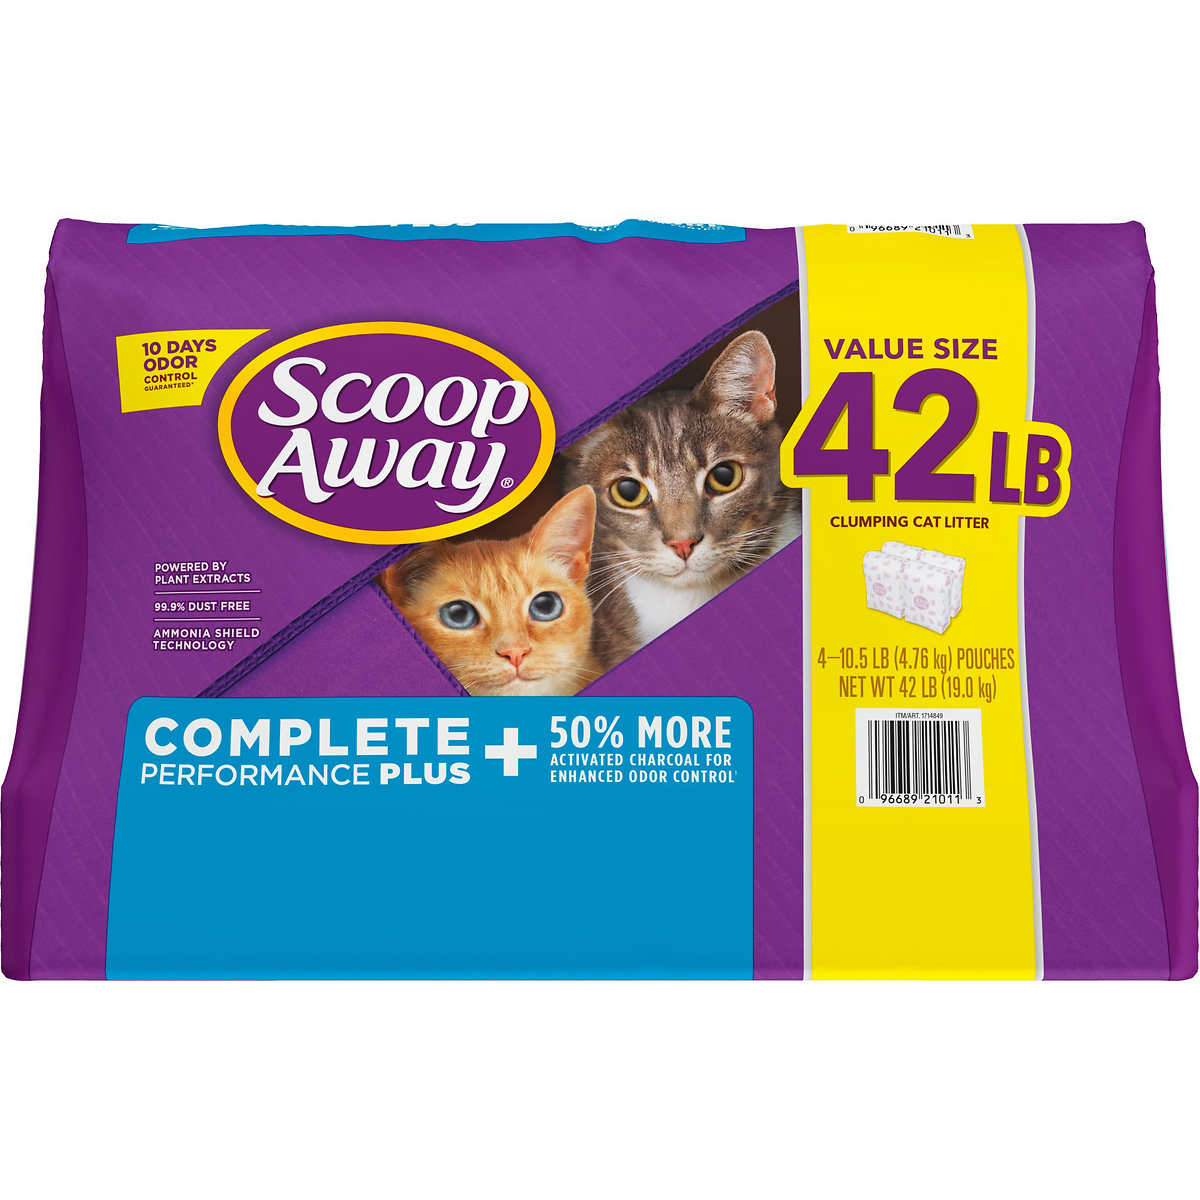 Scoop Away Complete Performance Plus, Clumping Cat Litter, Fresh Scent, 42 Pound